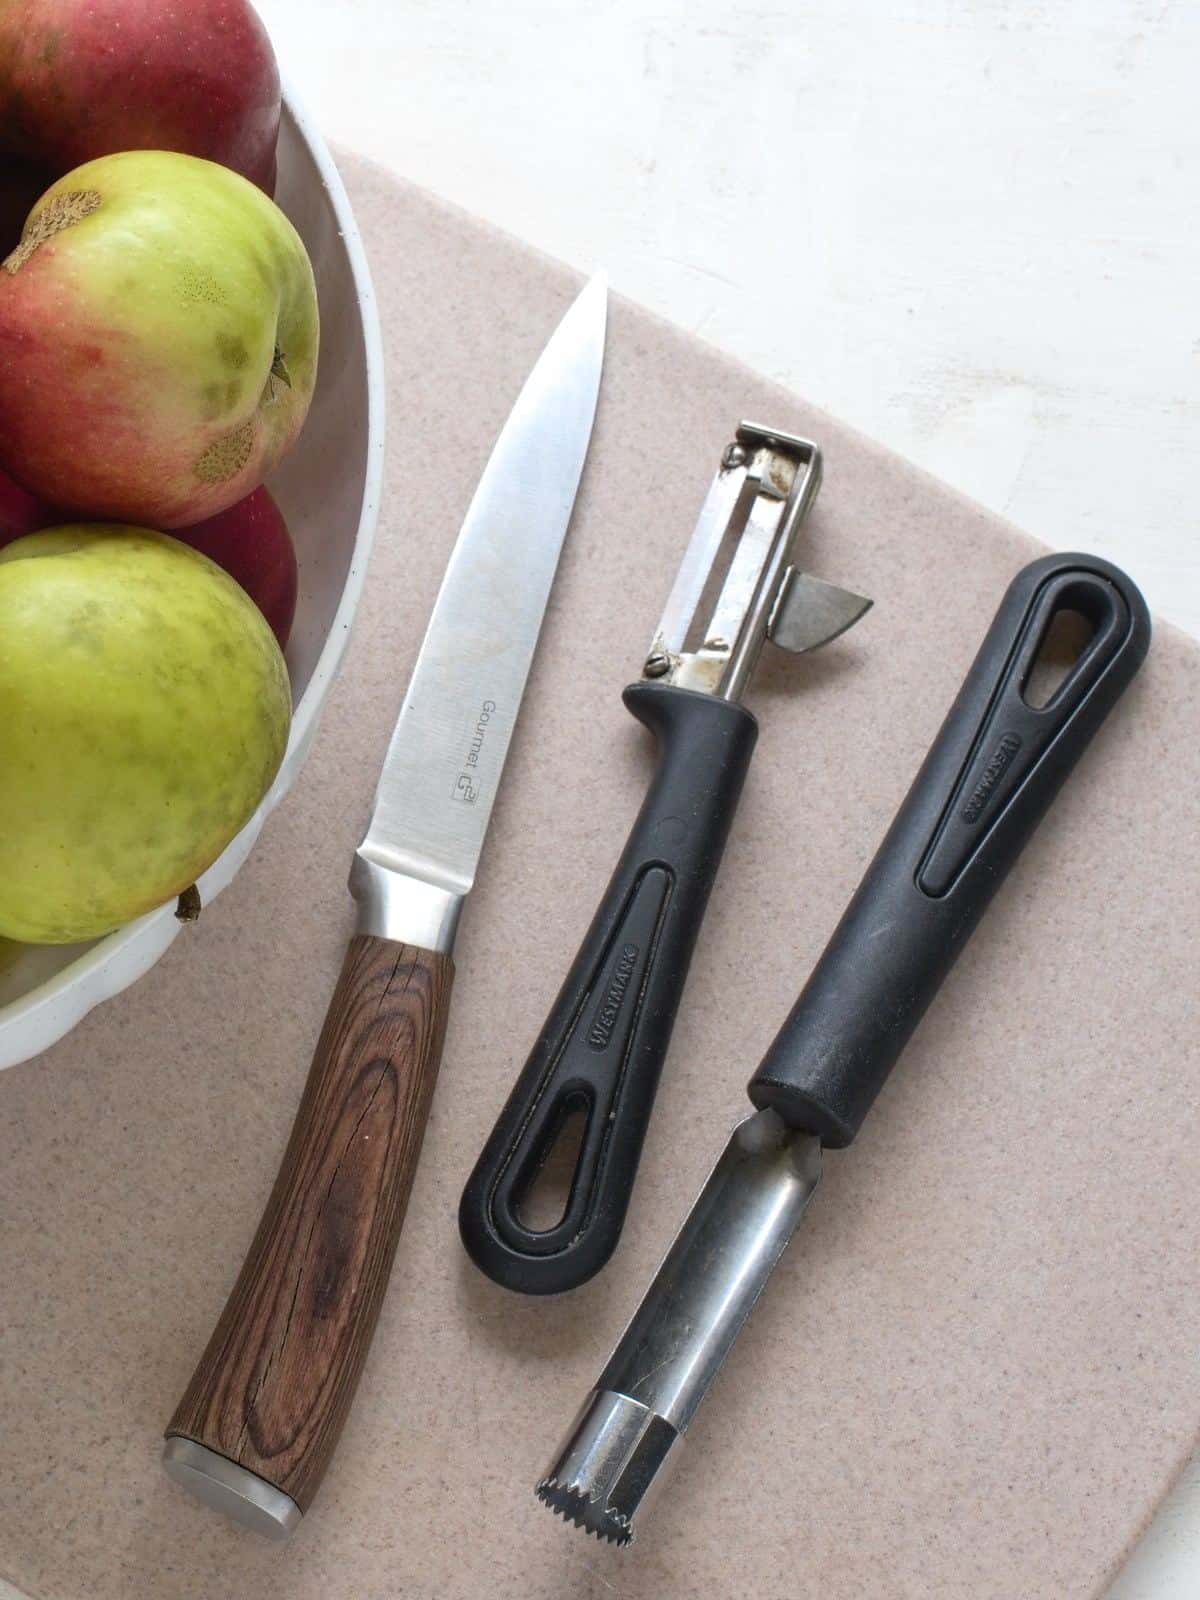 Kitchen tools needed for preparing apples for dehydrating.